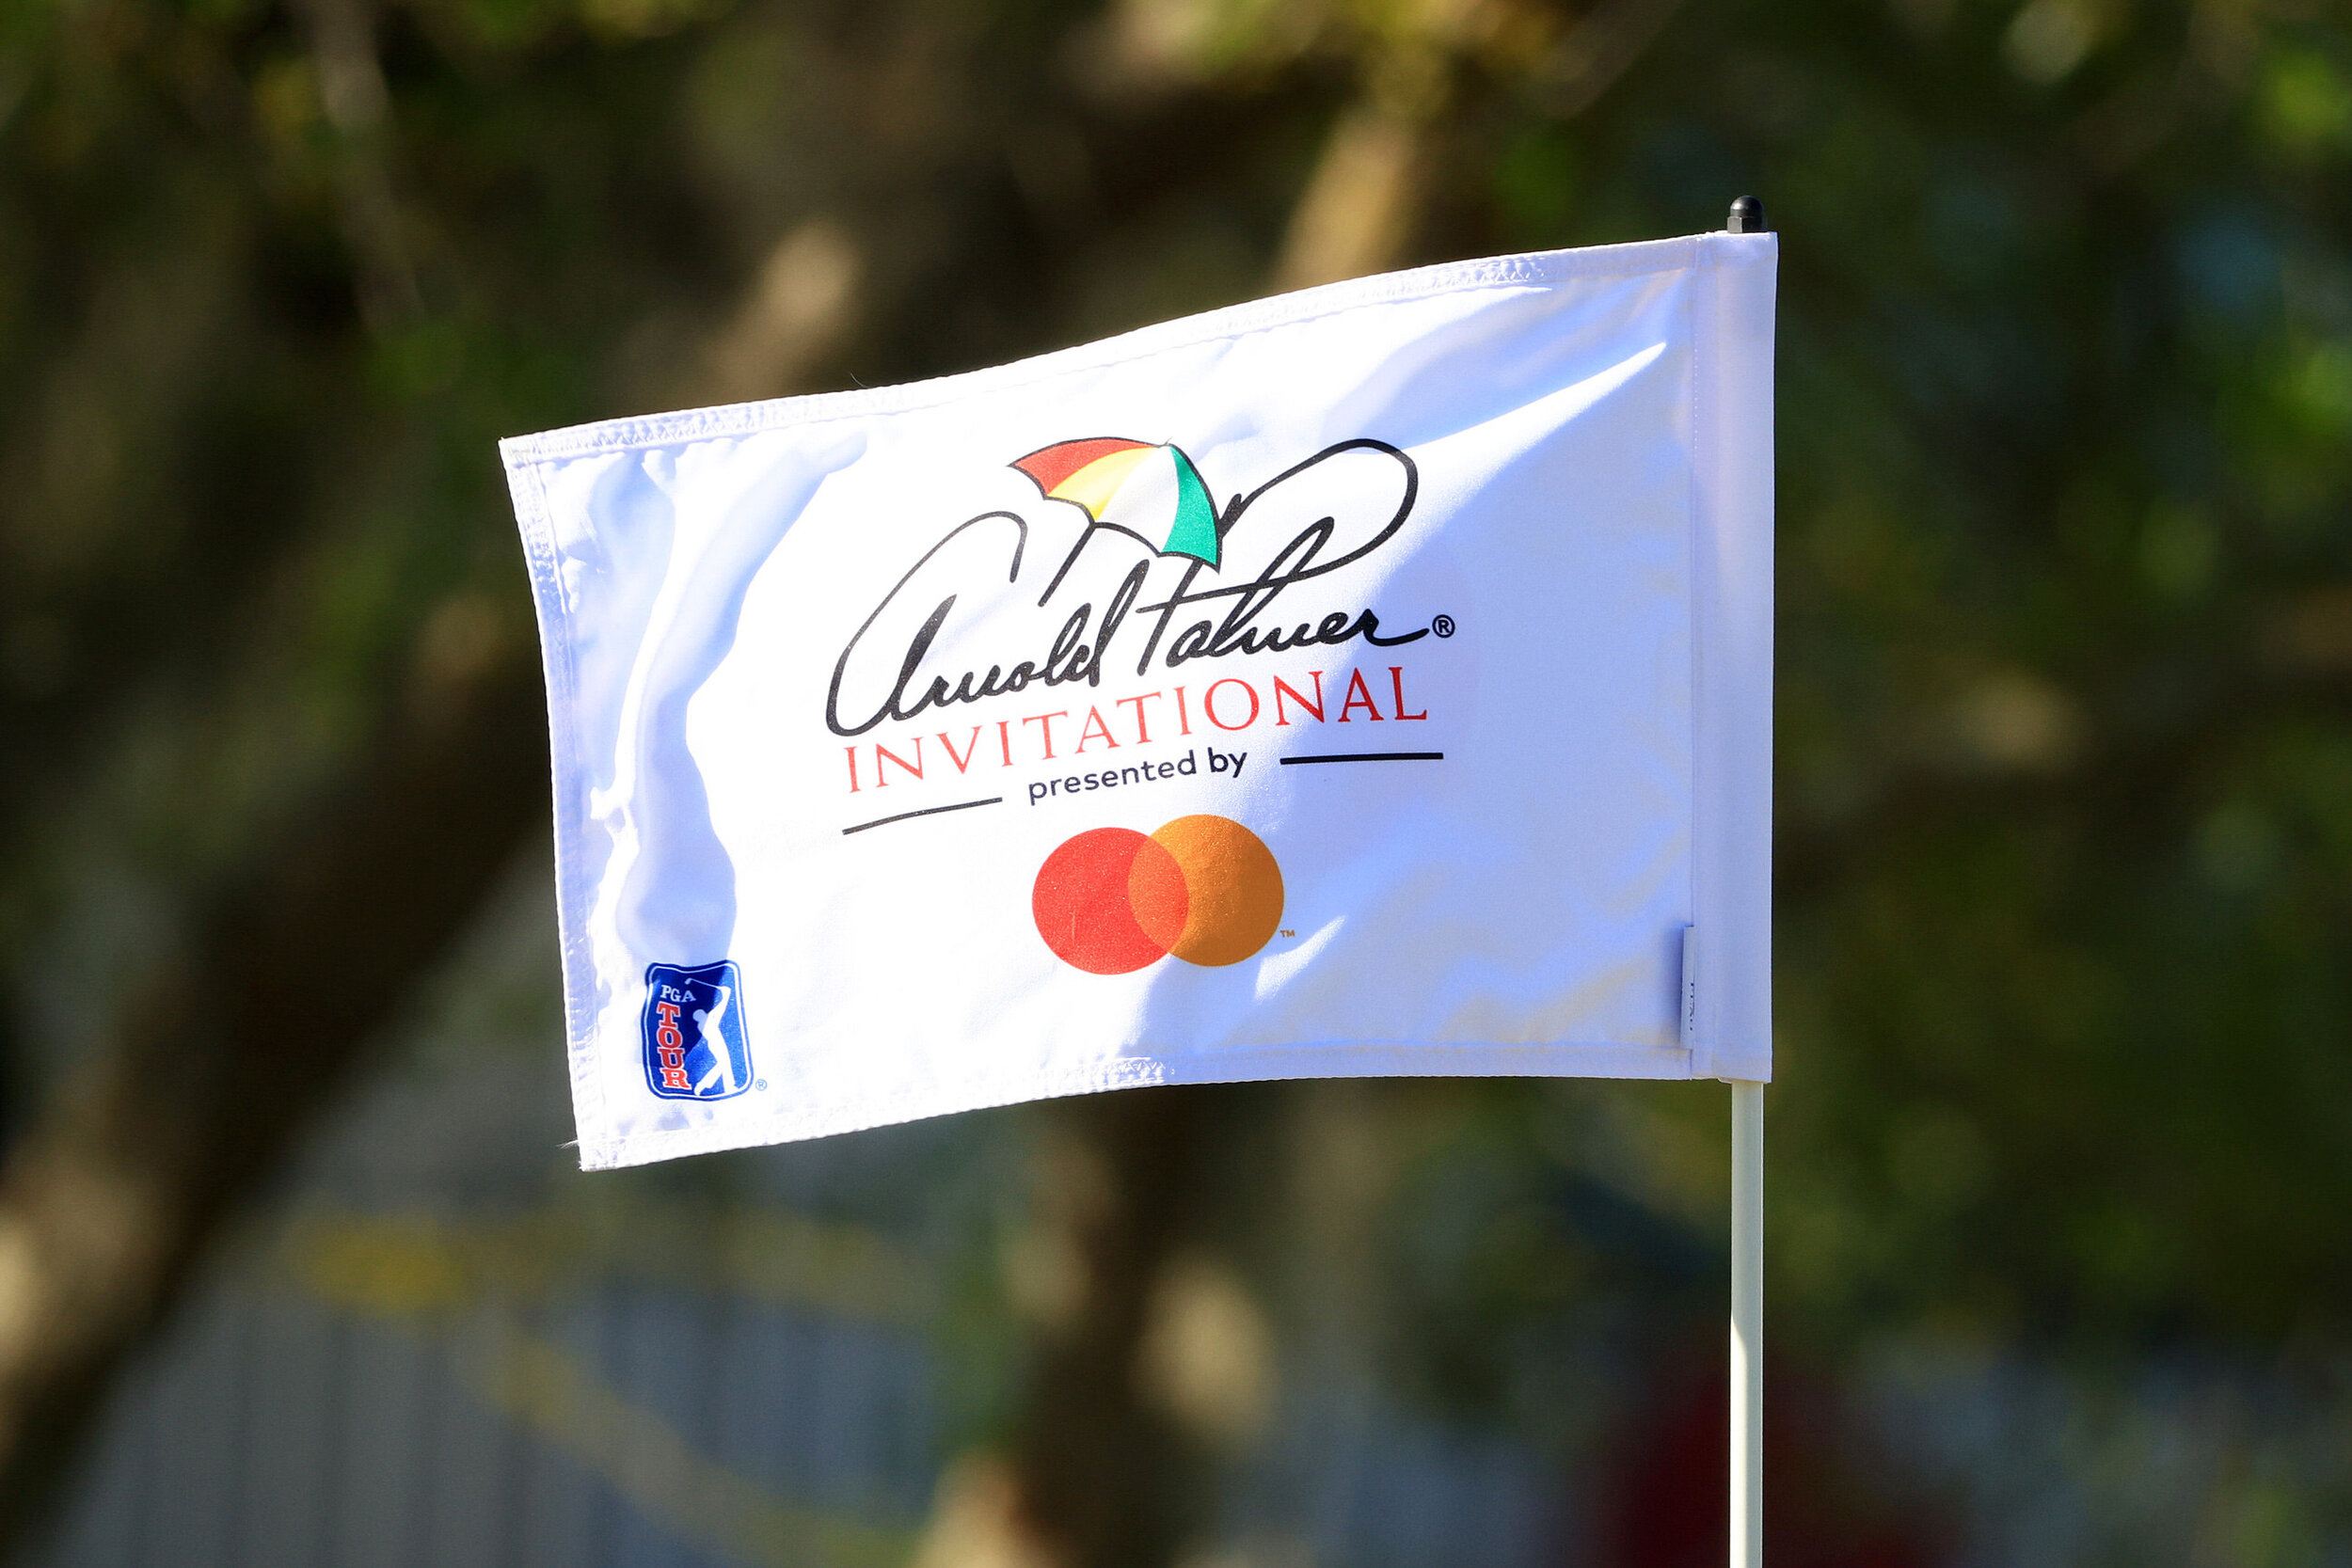  ORLANDO, FLORIDA - MARCH 07: A flag blows in the breeze during the final round of the Arnold Palmer Invitational Presented by MasterCard at the Bay Hill Club and Lodge on March 07, 2021 in Orlando, Florida. (Photo by Mike Ehrmann/Getty Images) 